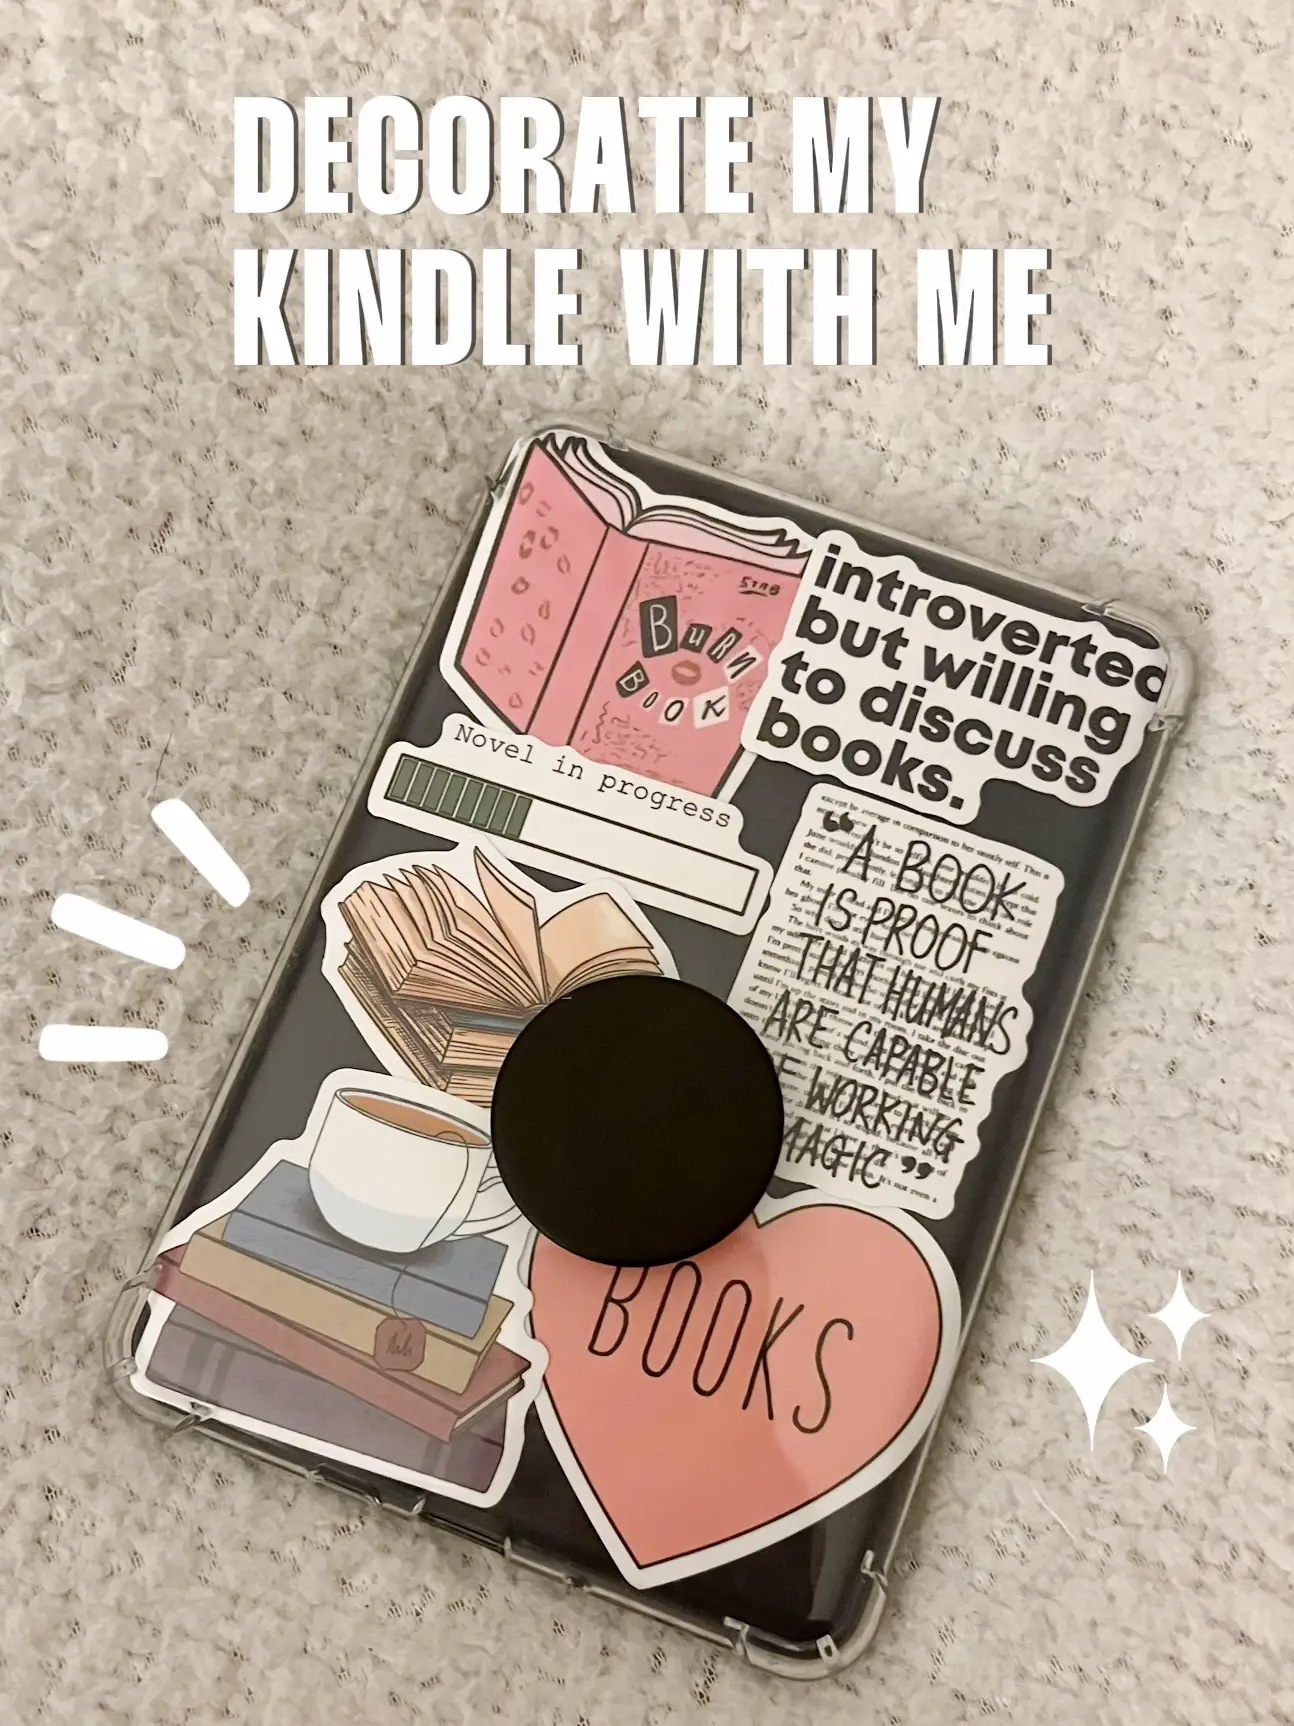 If I Die, Delete My Kindle Unlimited History Sticker Kindle Sticker Book  Lover Sticker Book Nerd Sticker Funny Book Sticker 